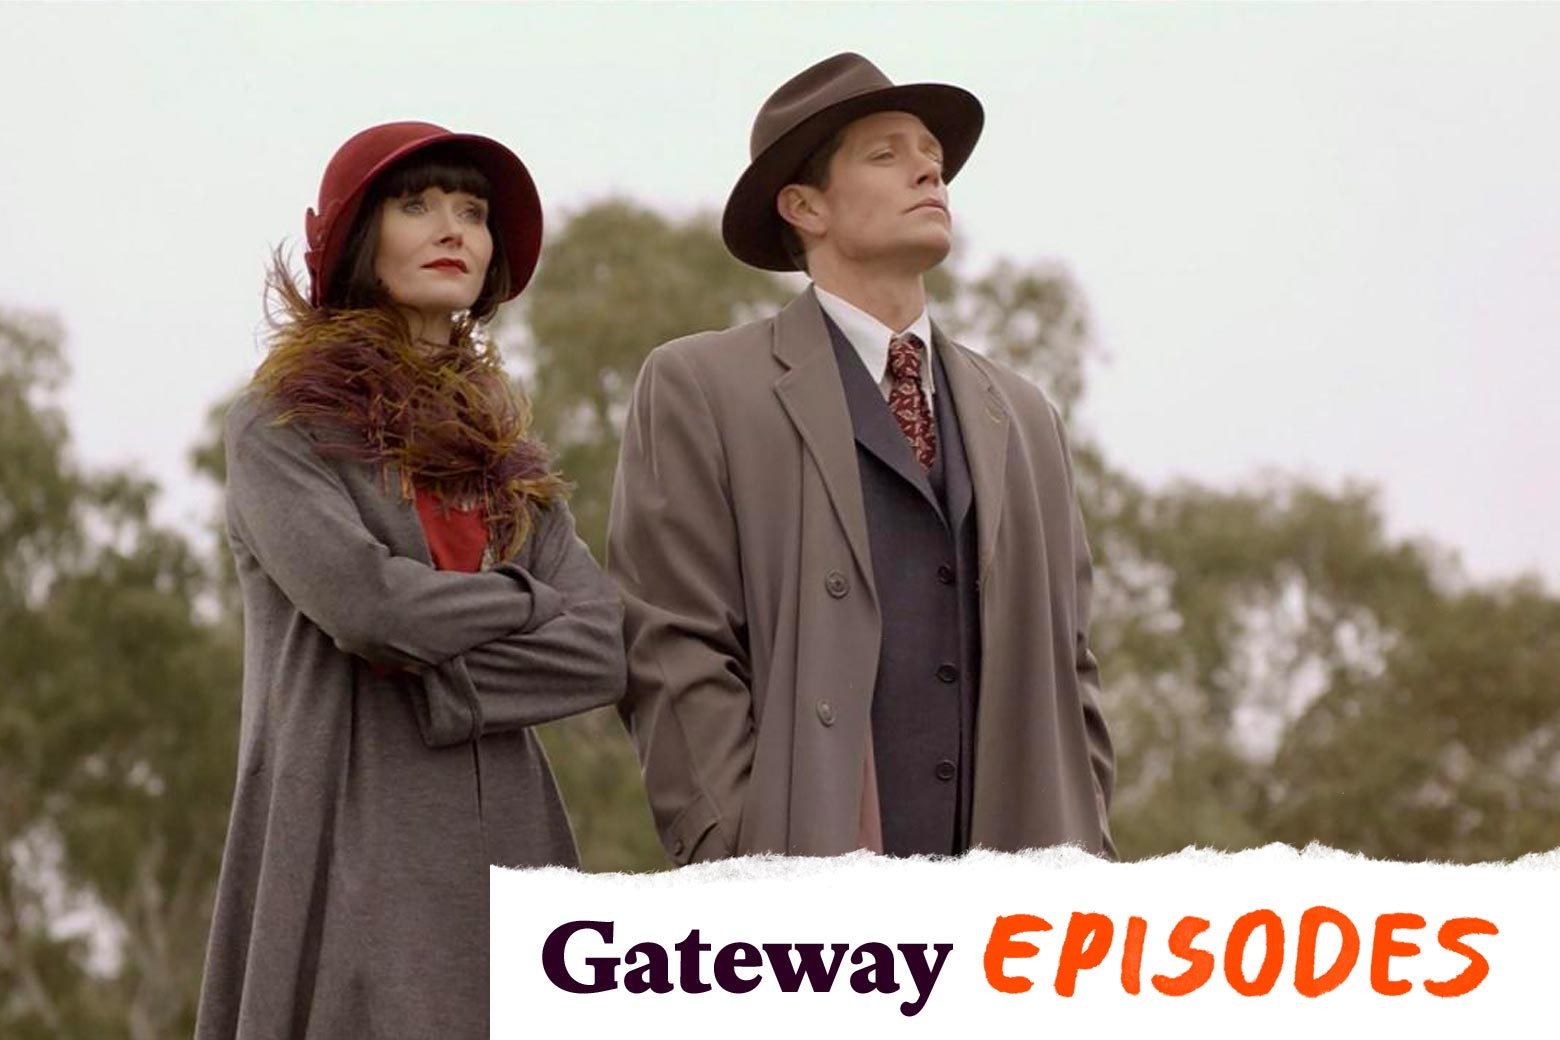 Essie Davis wears a red cloche hat and a fuzzy scarf, her hair cut in a blunt black bob. She stands next to Nathan Page, in a fedora and trench coat.